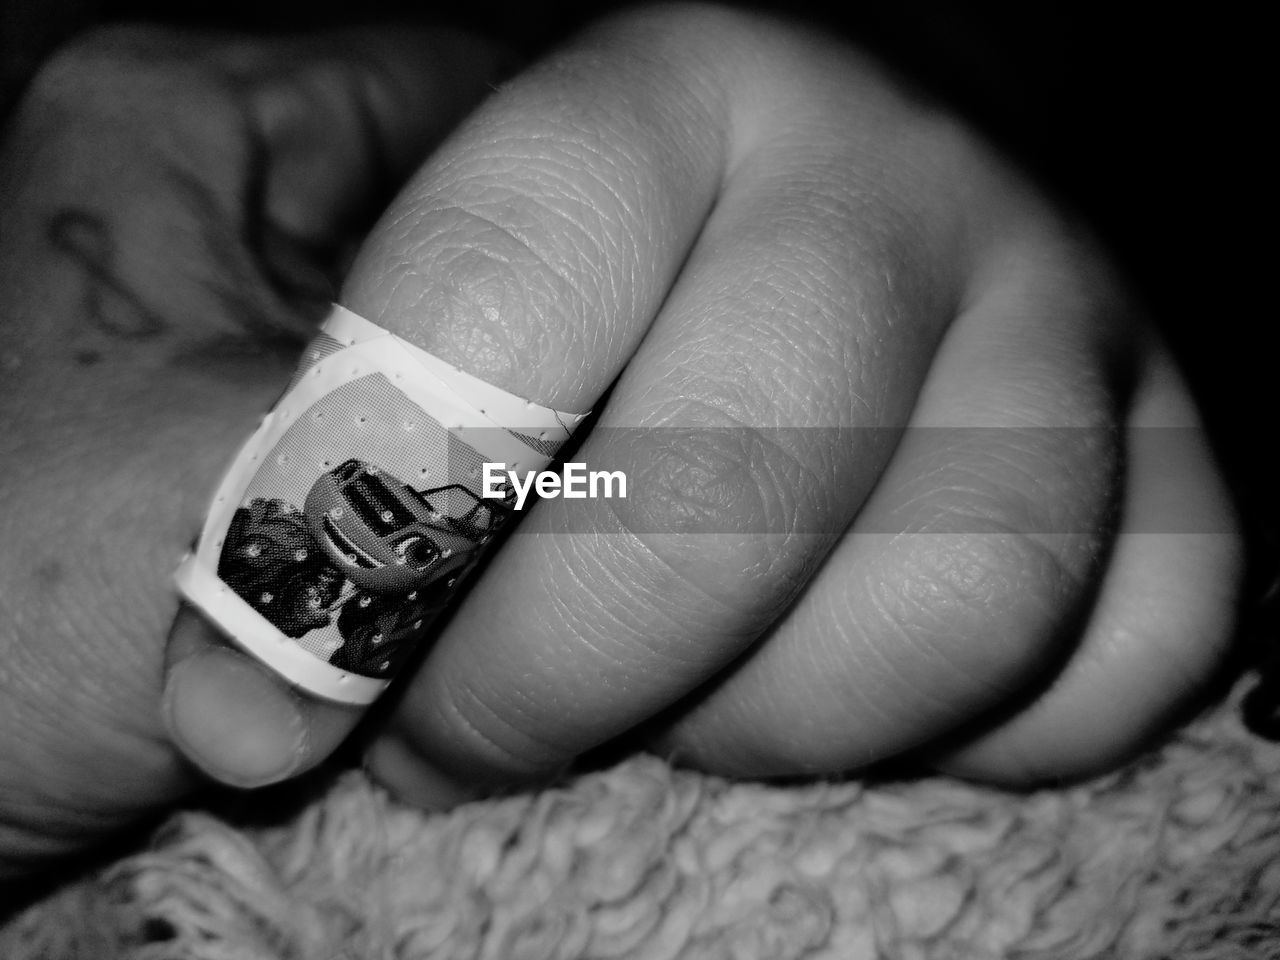 EyeEm Selects Human Body Part Human Hand One Person Human Finger People Indoors  Adult Close-up One Woman Only Adults Only Only Women Fingernail Day Touching Magic Moments Real People Strongwoman Strong Love Will Always Survive. Be. Ready. EyeEmNewHere